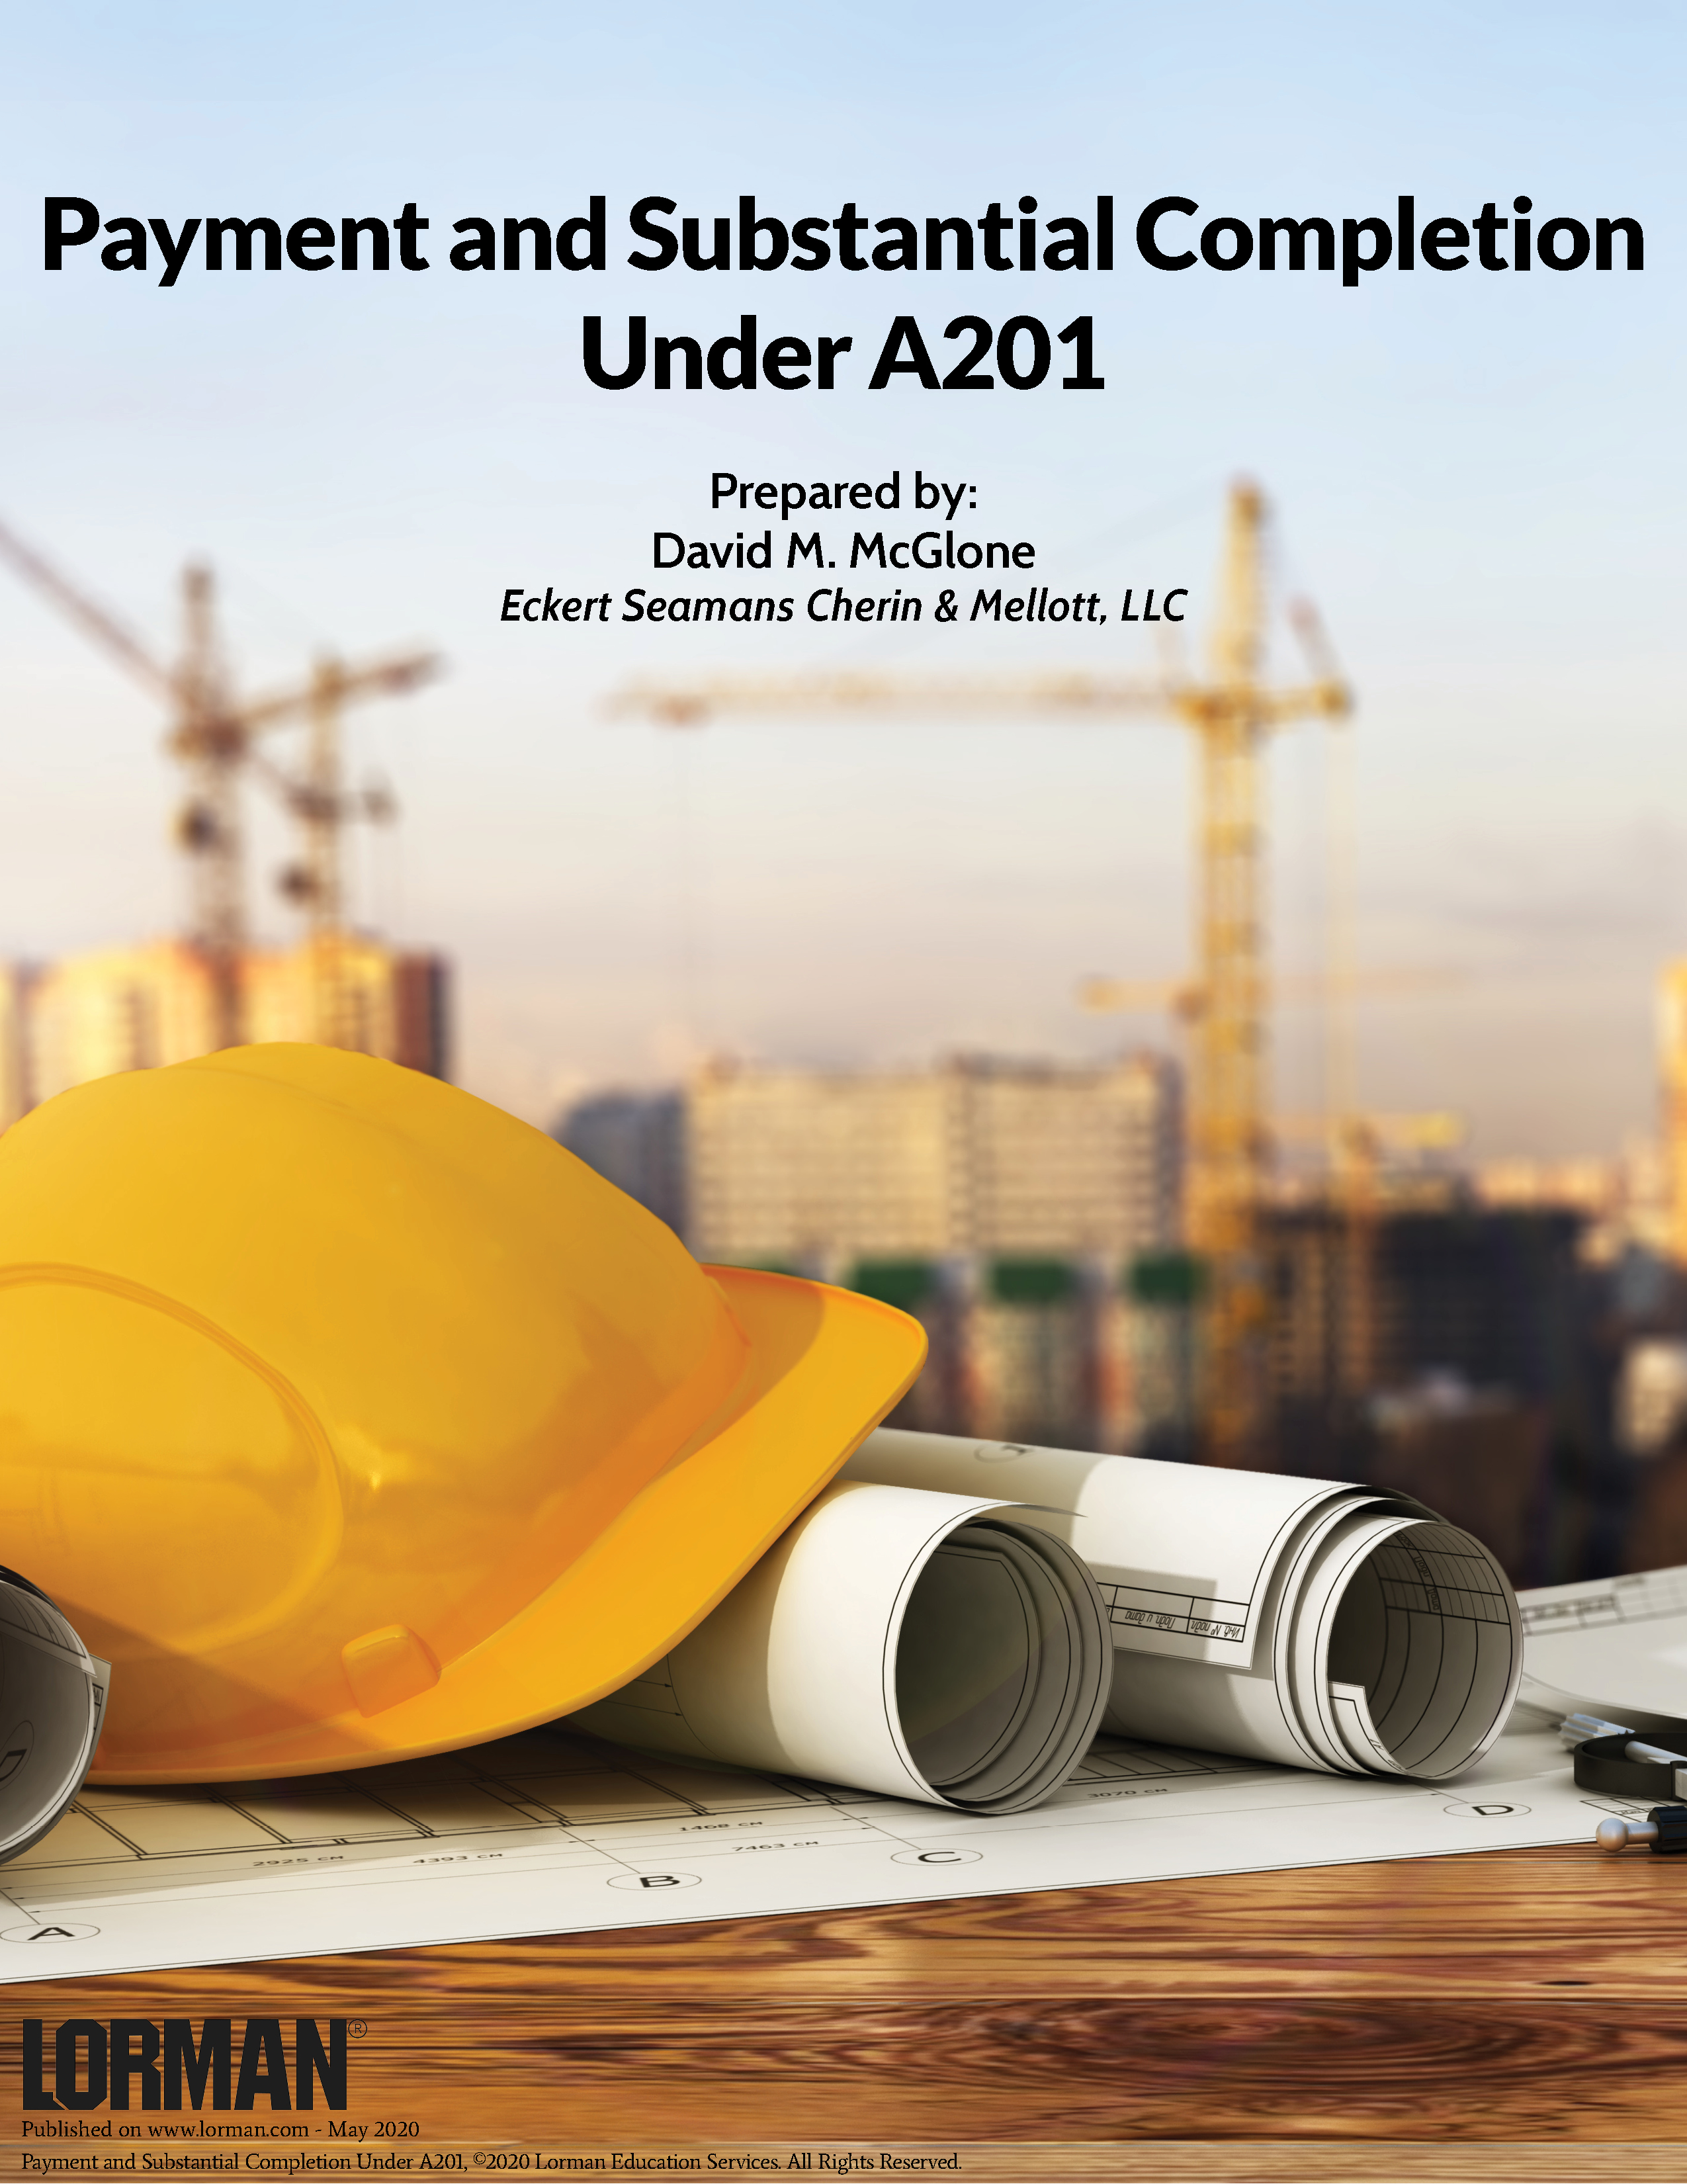 Payment and Substantial Completion Under A201